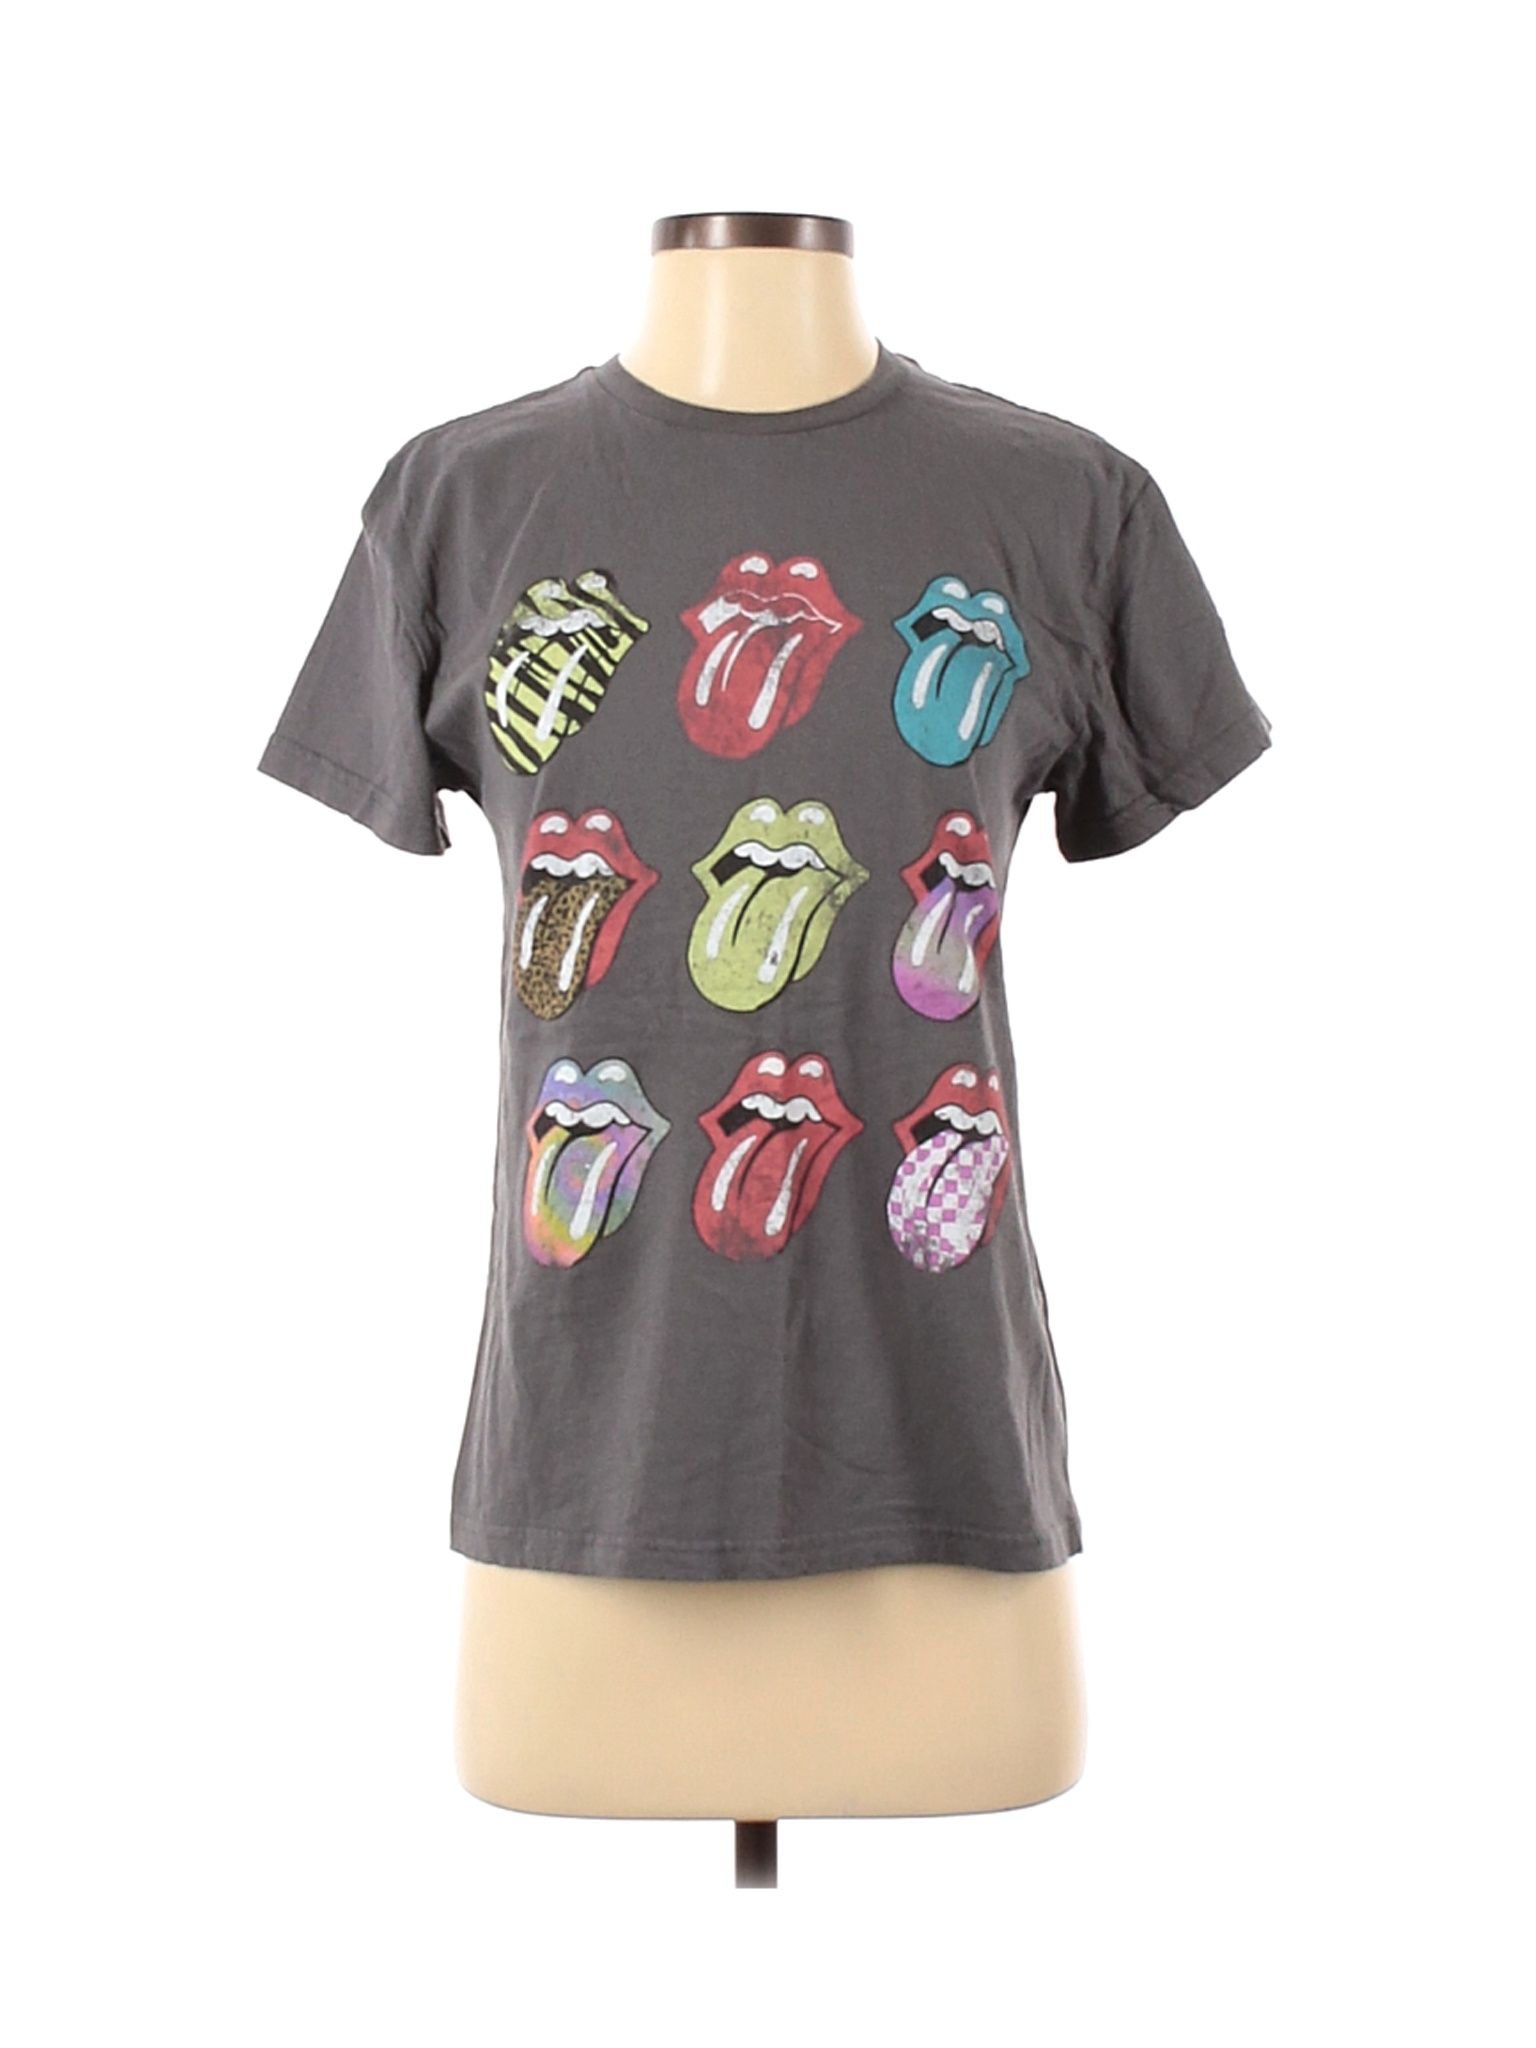 Pre-Owned The Rolling Stones Women's Size S Short Sleeve T-Shirt | Walmart (US)